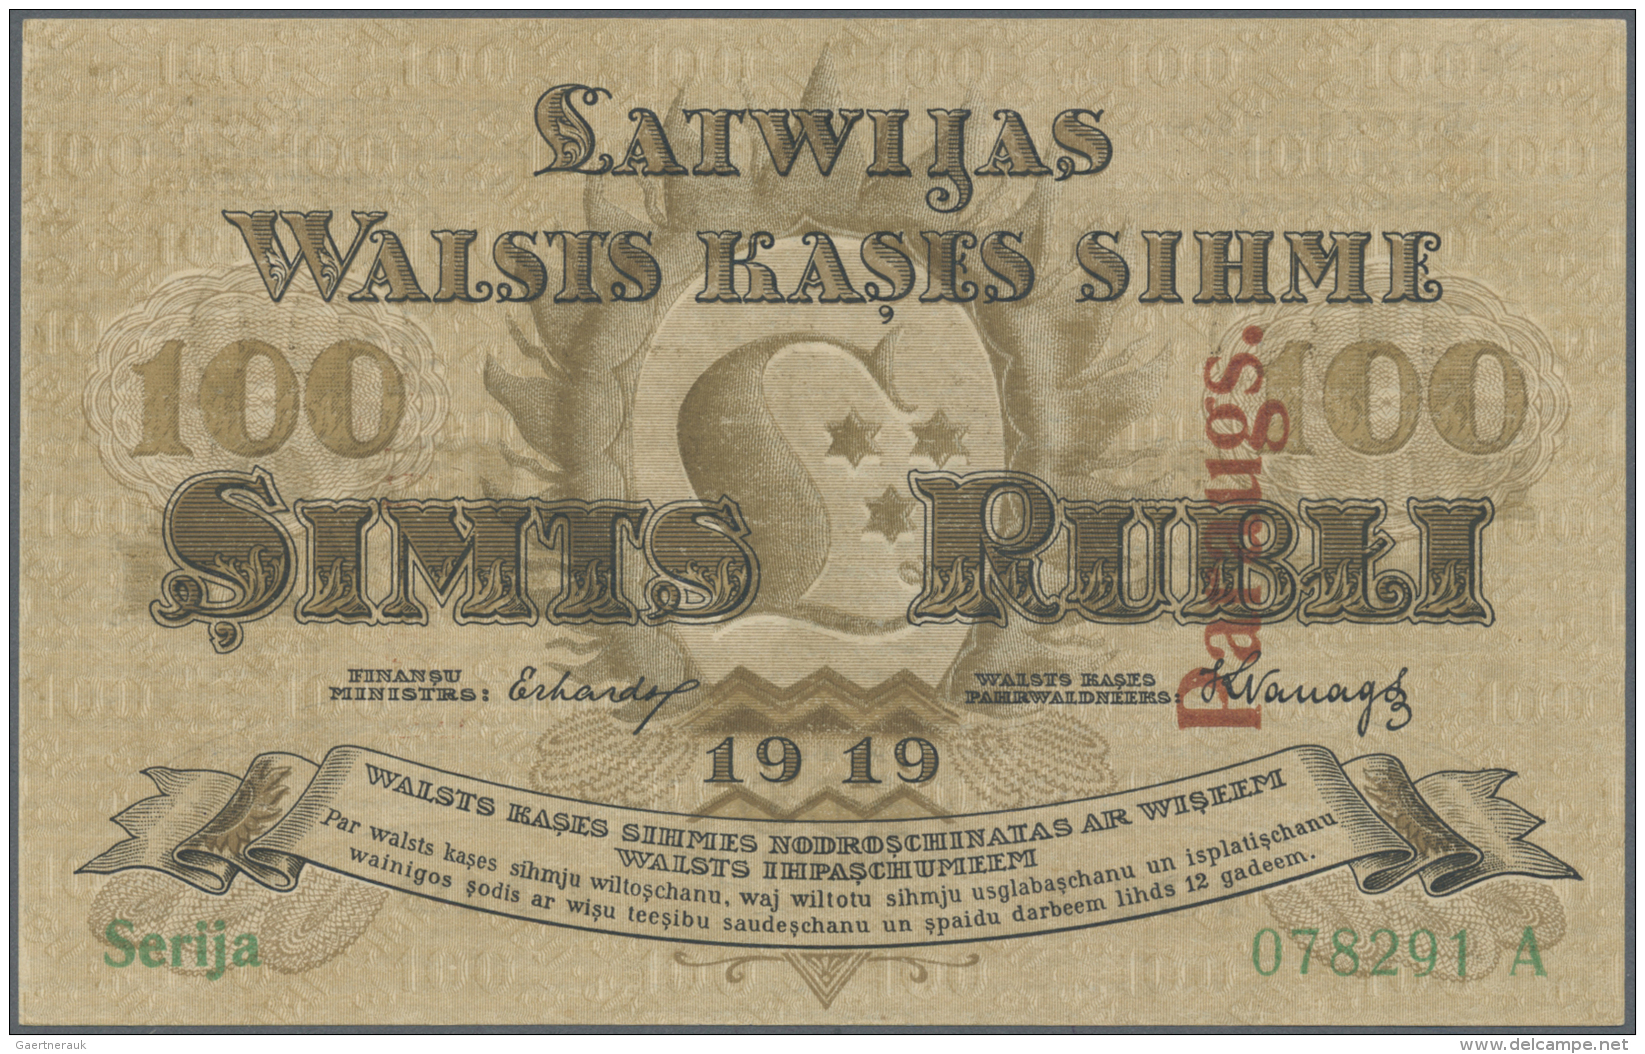 Latvia /Lettland: Rare SPECIMEN Note Of 100 Rubli 1919 P. 7s, Series "A", Sign. Erhards, With 2 Red Vertical PARAUGS Ove - Lettonie